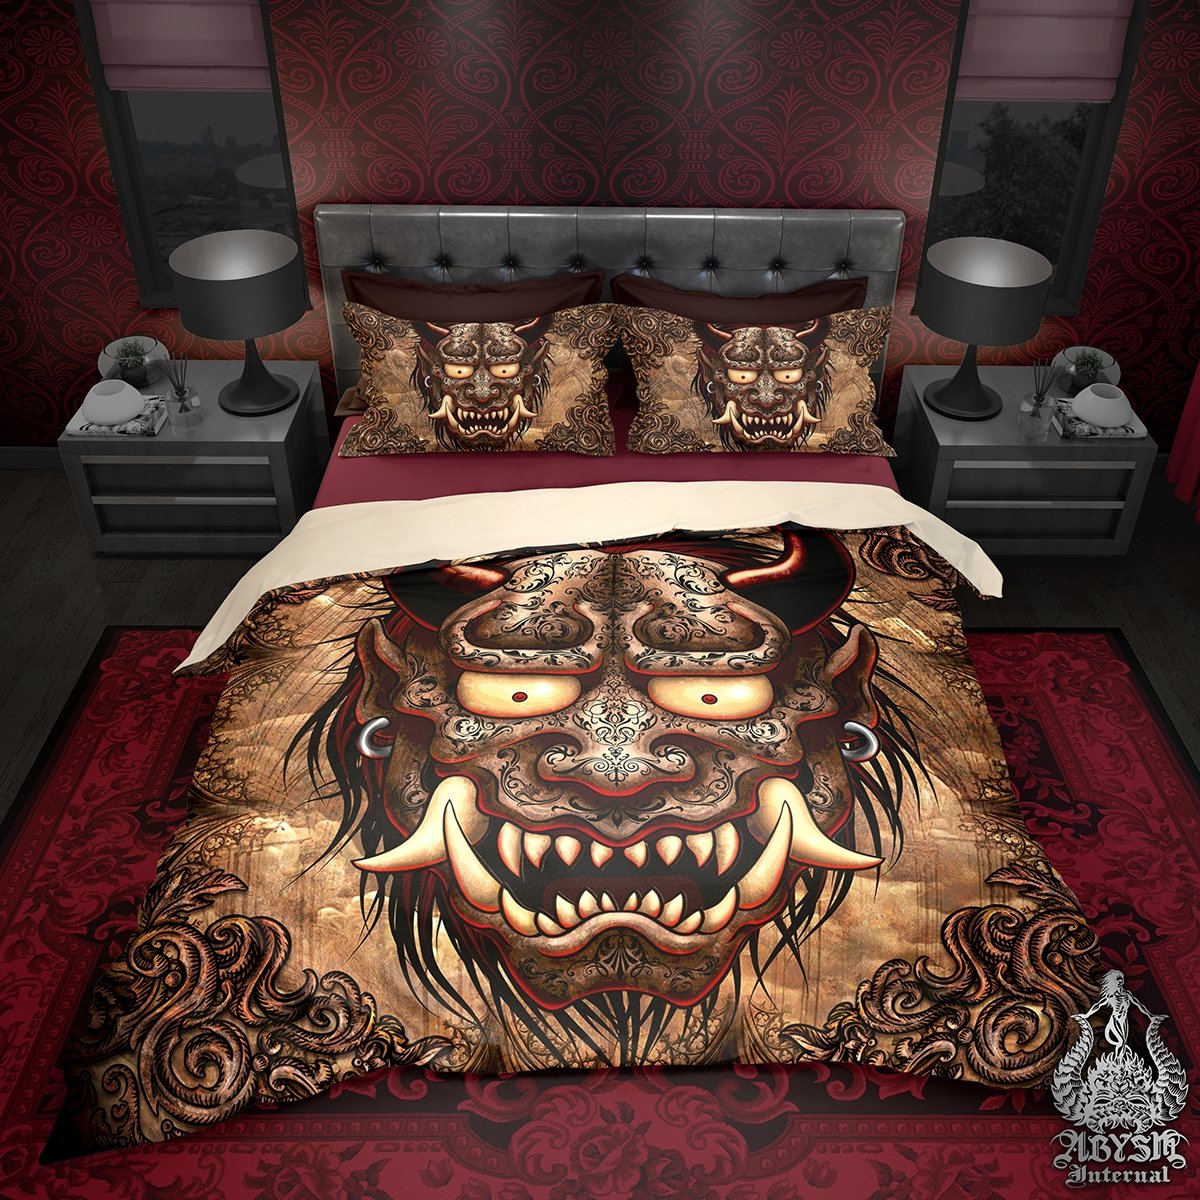 Oni Bedding Set, Comforter and Duvet, Goth Gargoyle Bed Cover and Bedroom Decor, Japanese Demon, King, Queen and Twin Size - Beige - Abysm Internal